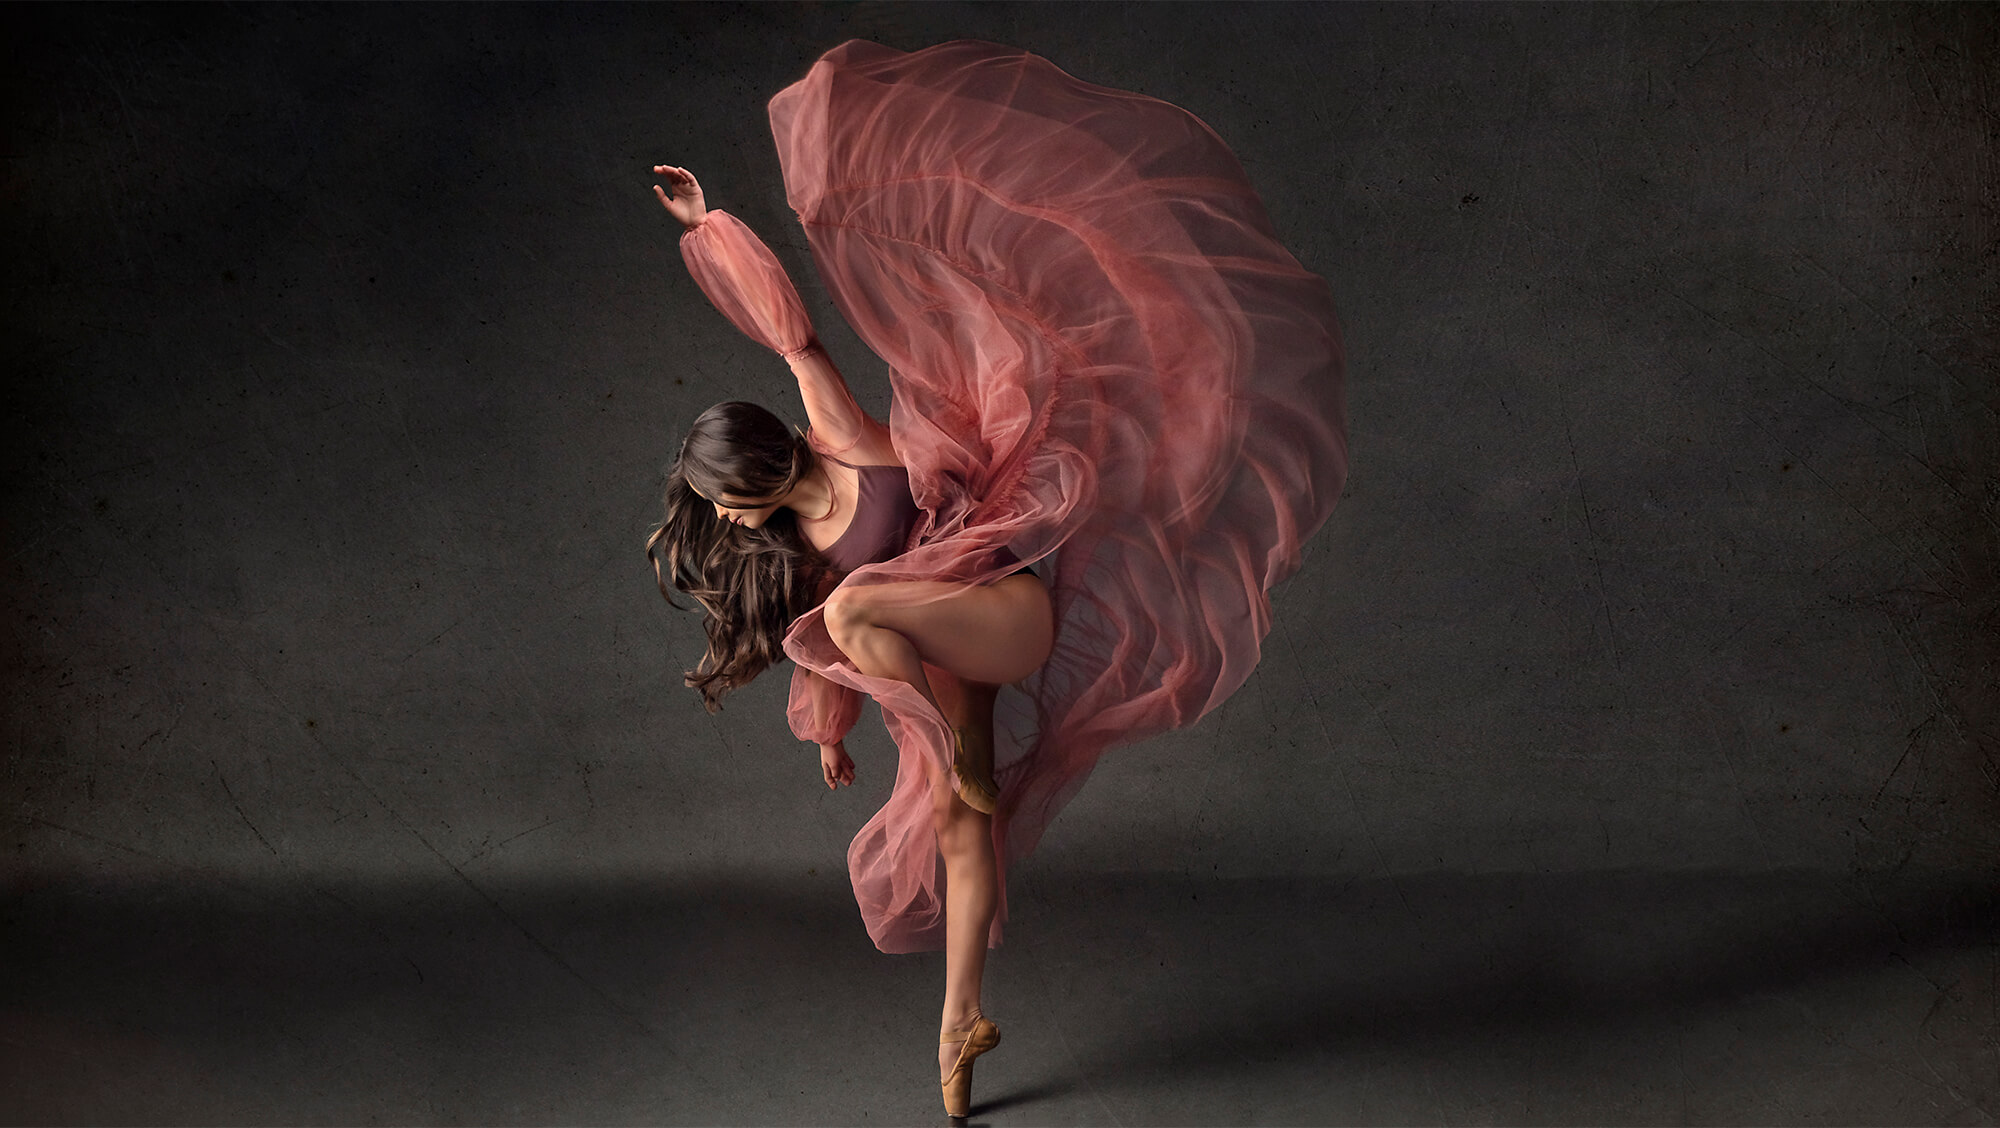 Fine Art Dancer photo in pink dress on pointe shoes